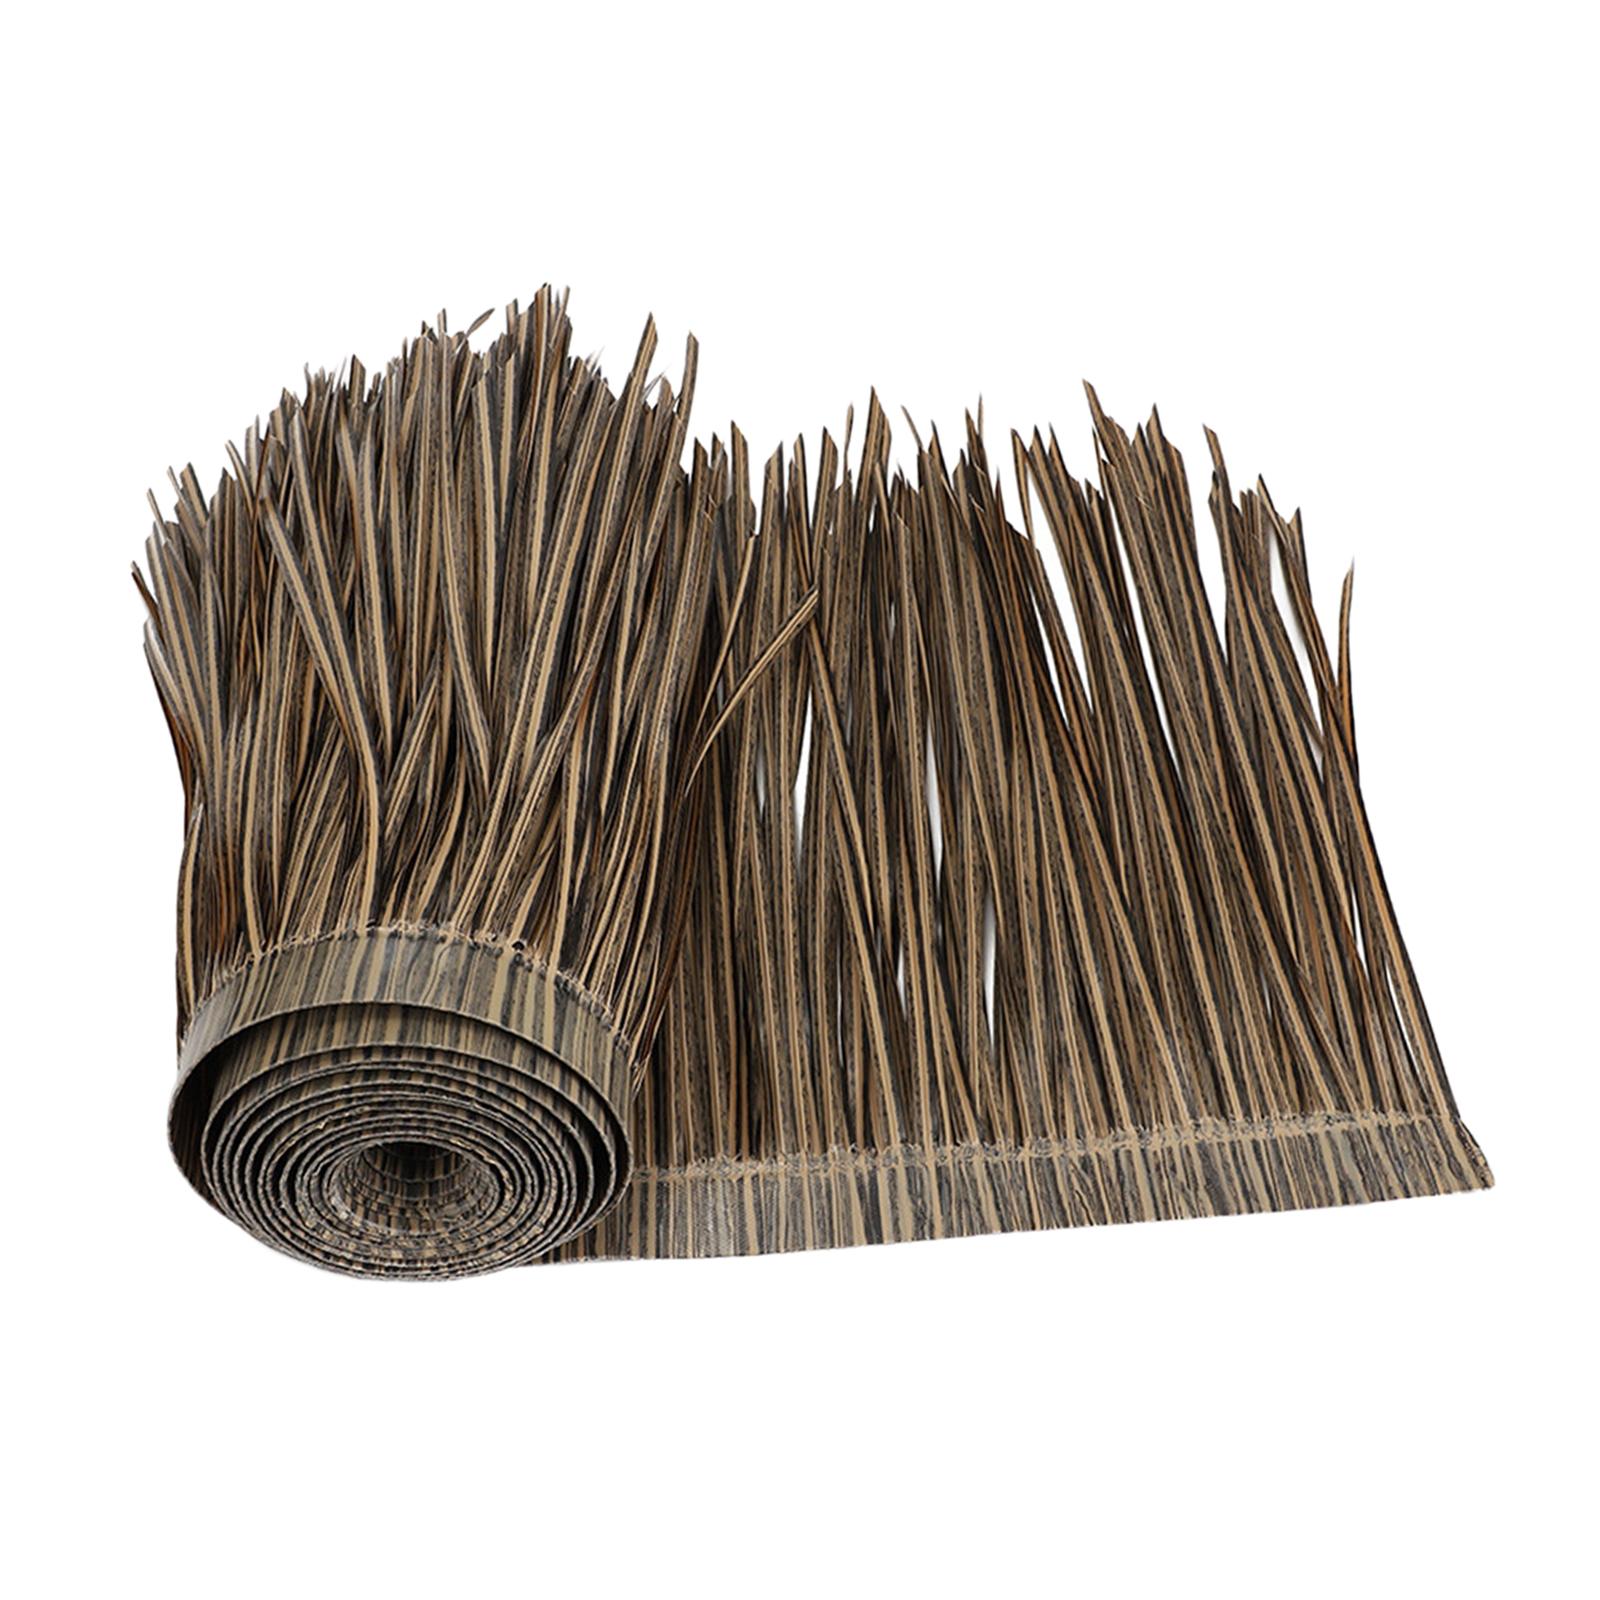  1.64x13.12ft Raffia Grass Thatch Roofing Blind Grass, Natural  Thatch Decorations Cover Simulation Thatch, Duck Boat Blinds Thatched Tiles  Palm Thatch Rolls Straw Roof, for Umbrella Covers Mini Bar ( S 